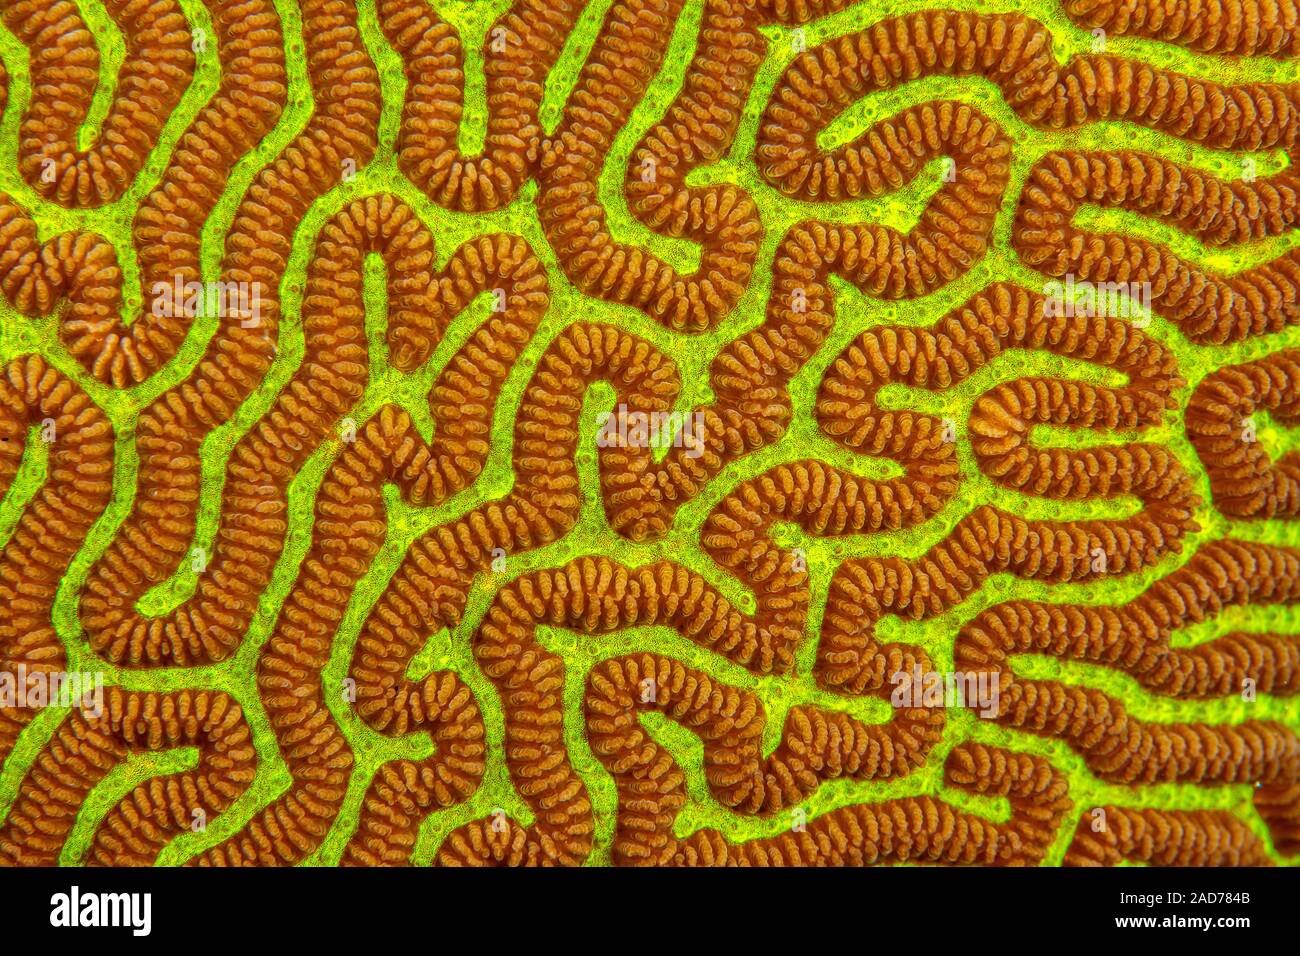 A close look at the detail of brain coral, Platygyra sinensis, during the day with the its polyps closed, Yap, Micronesia. Stock Photo